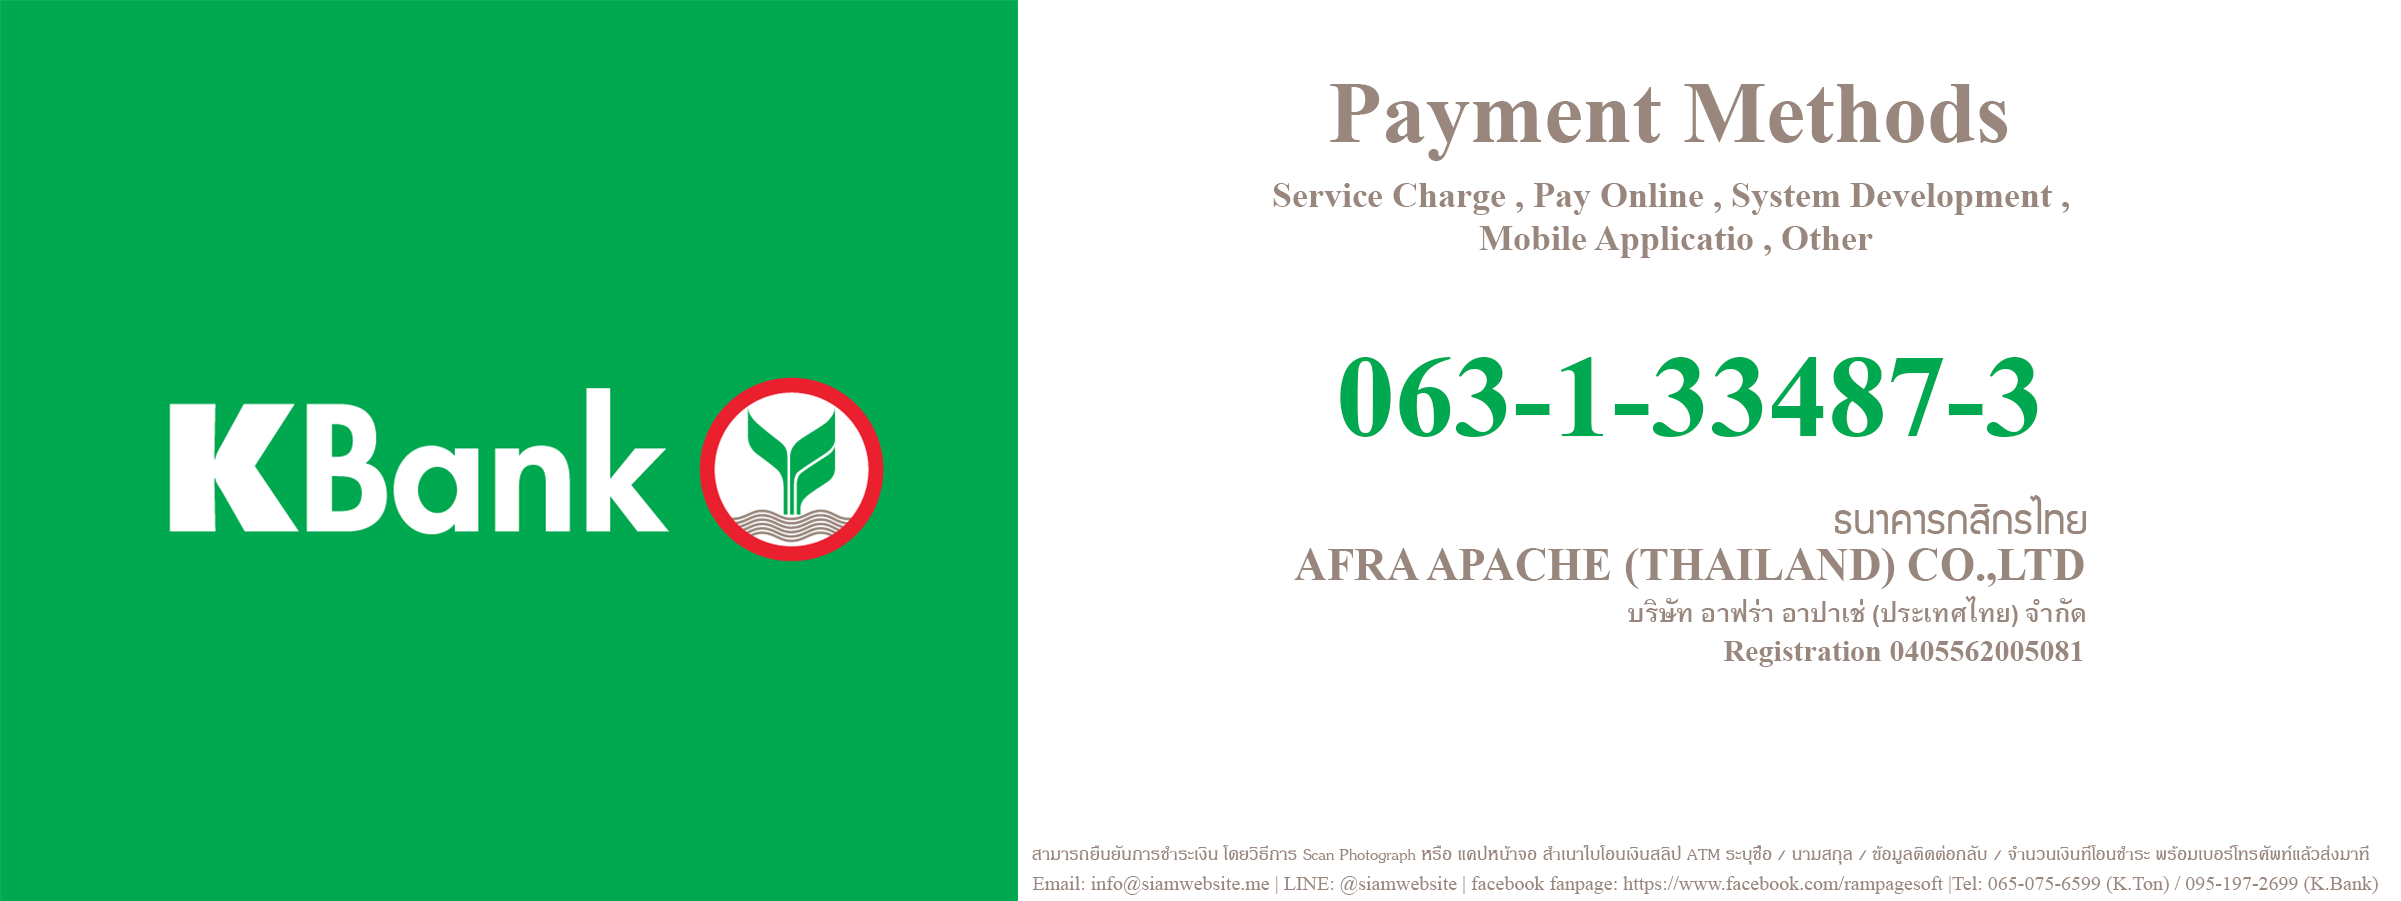 PAYMENT AFRA APACHE